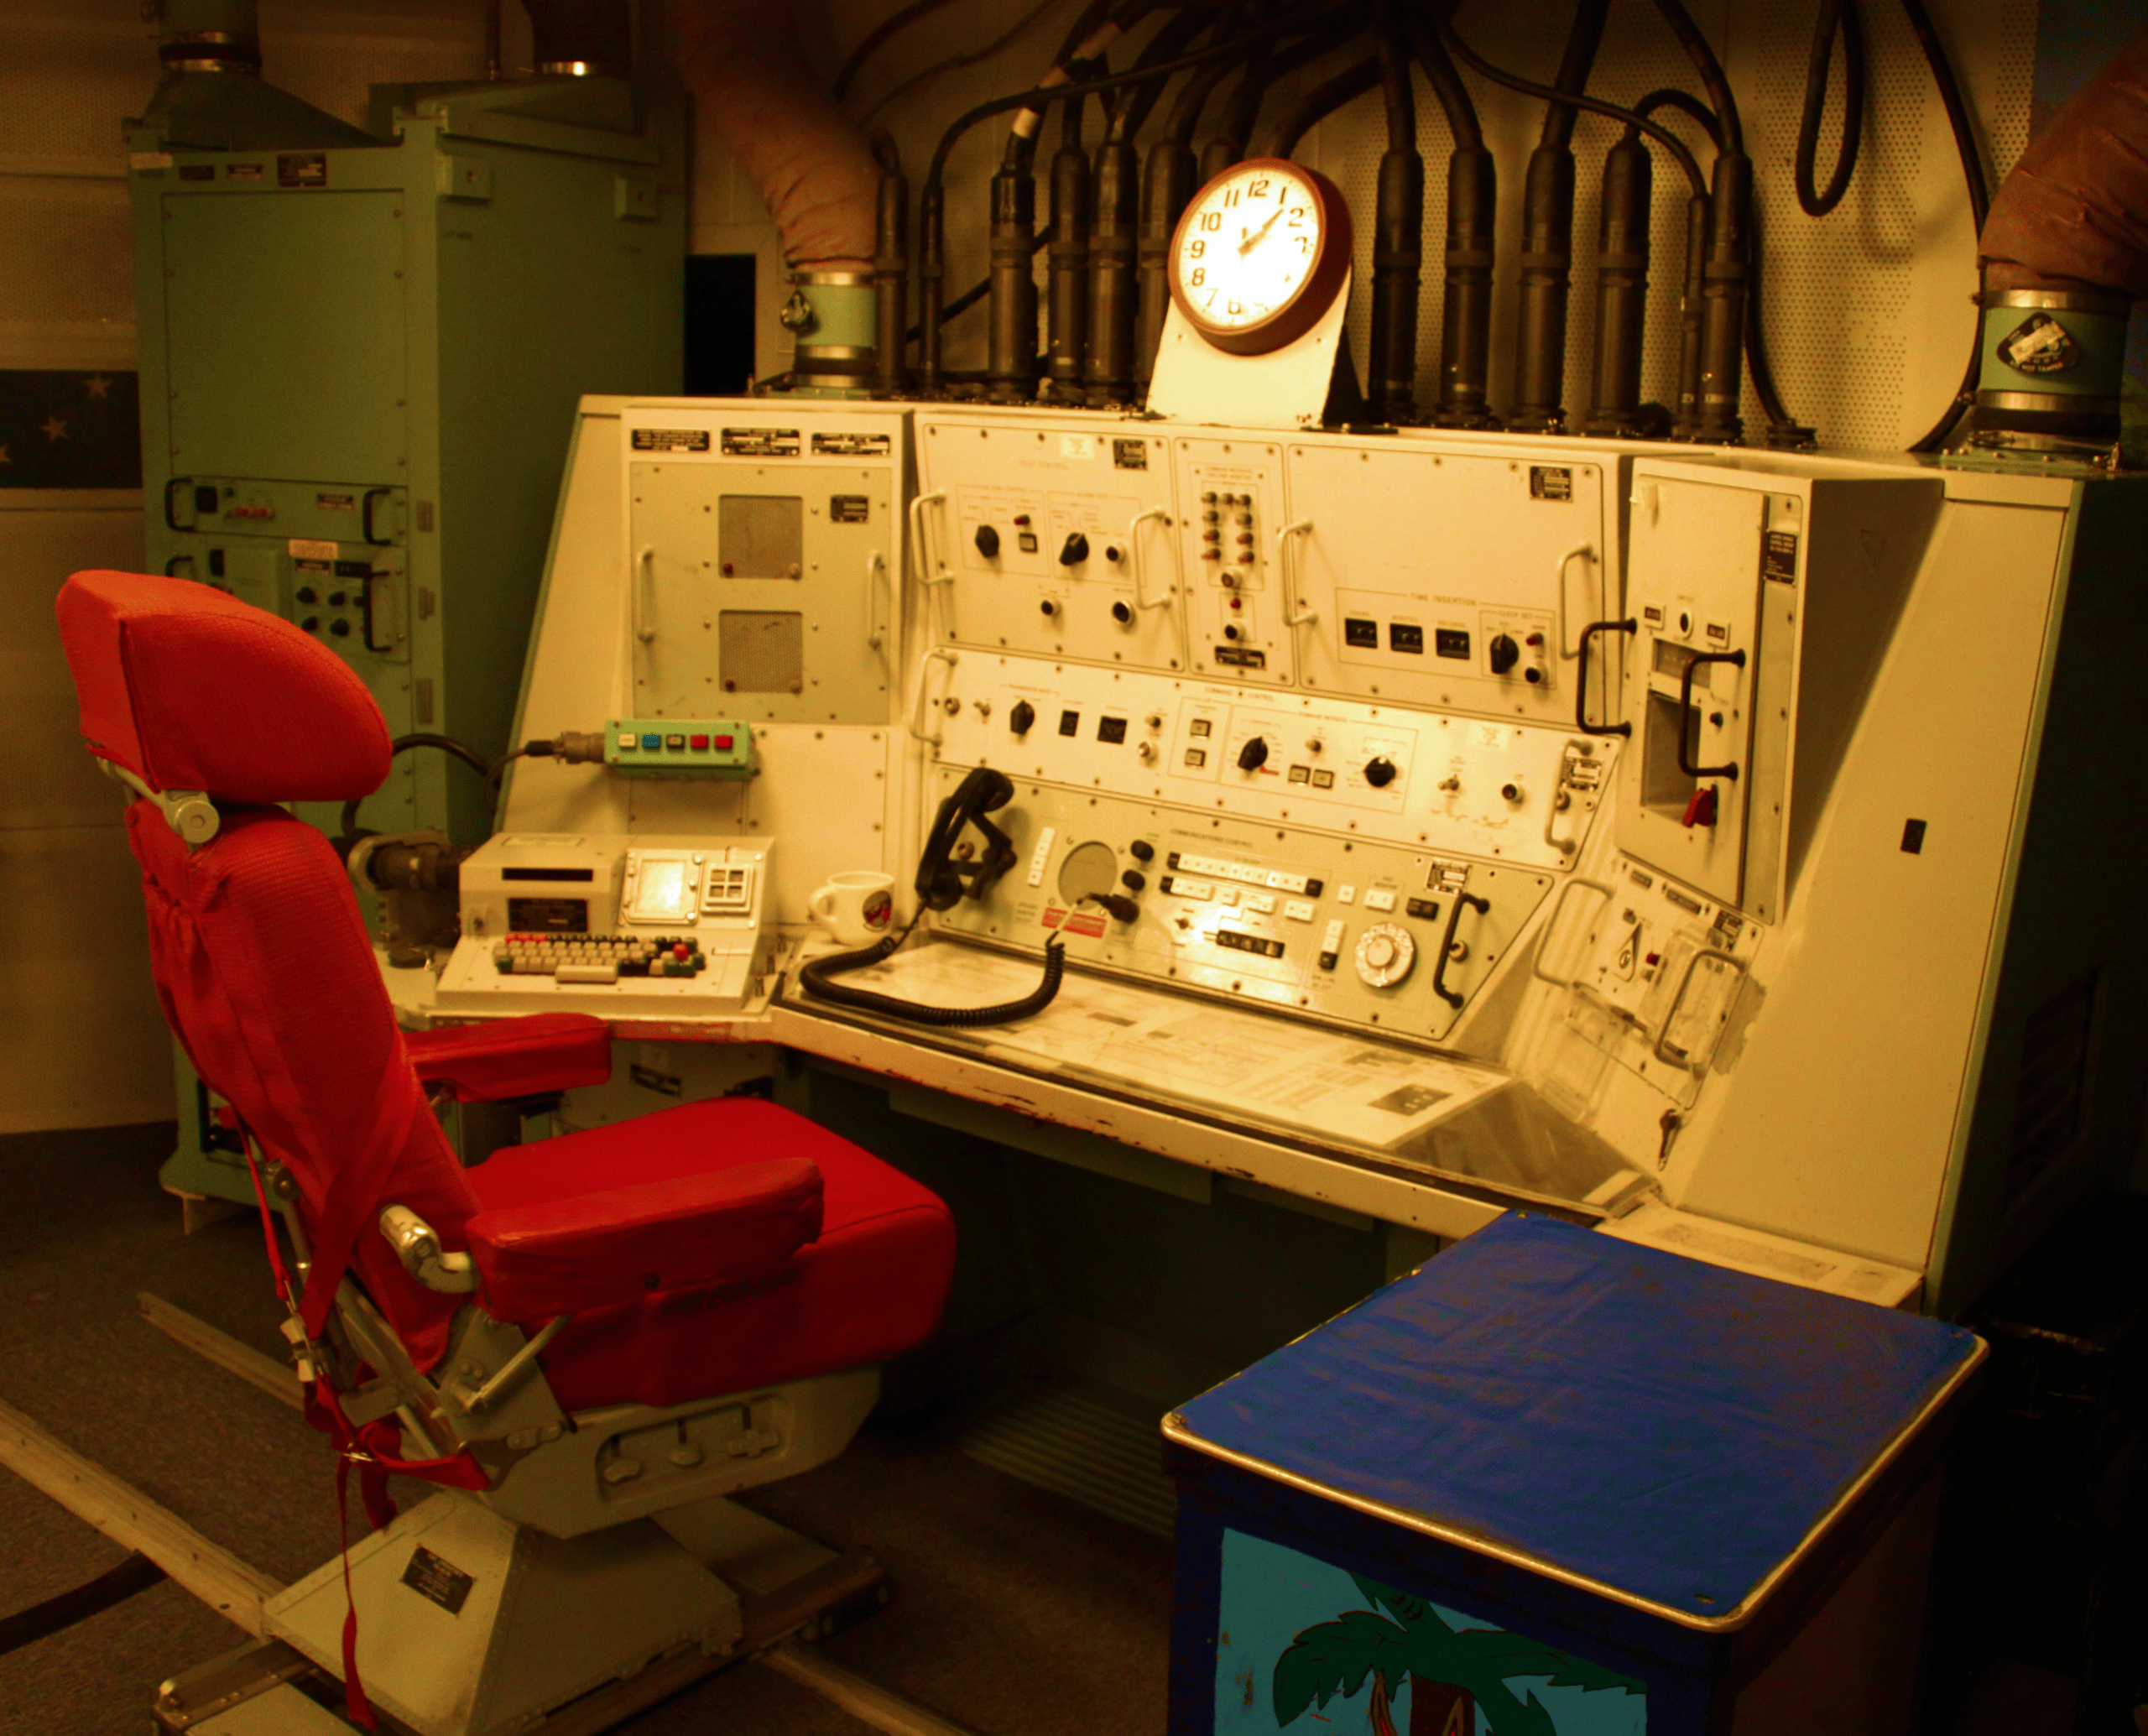 Minuteman III Launch Control, Oscar Zero Missile Alert Facility at the Ronald Reagan Minuteman Missile Site